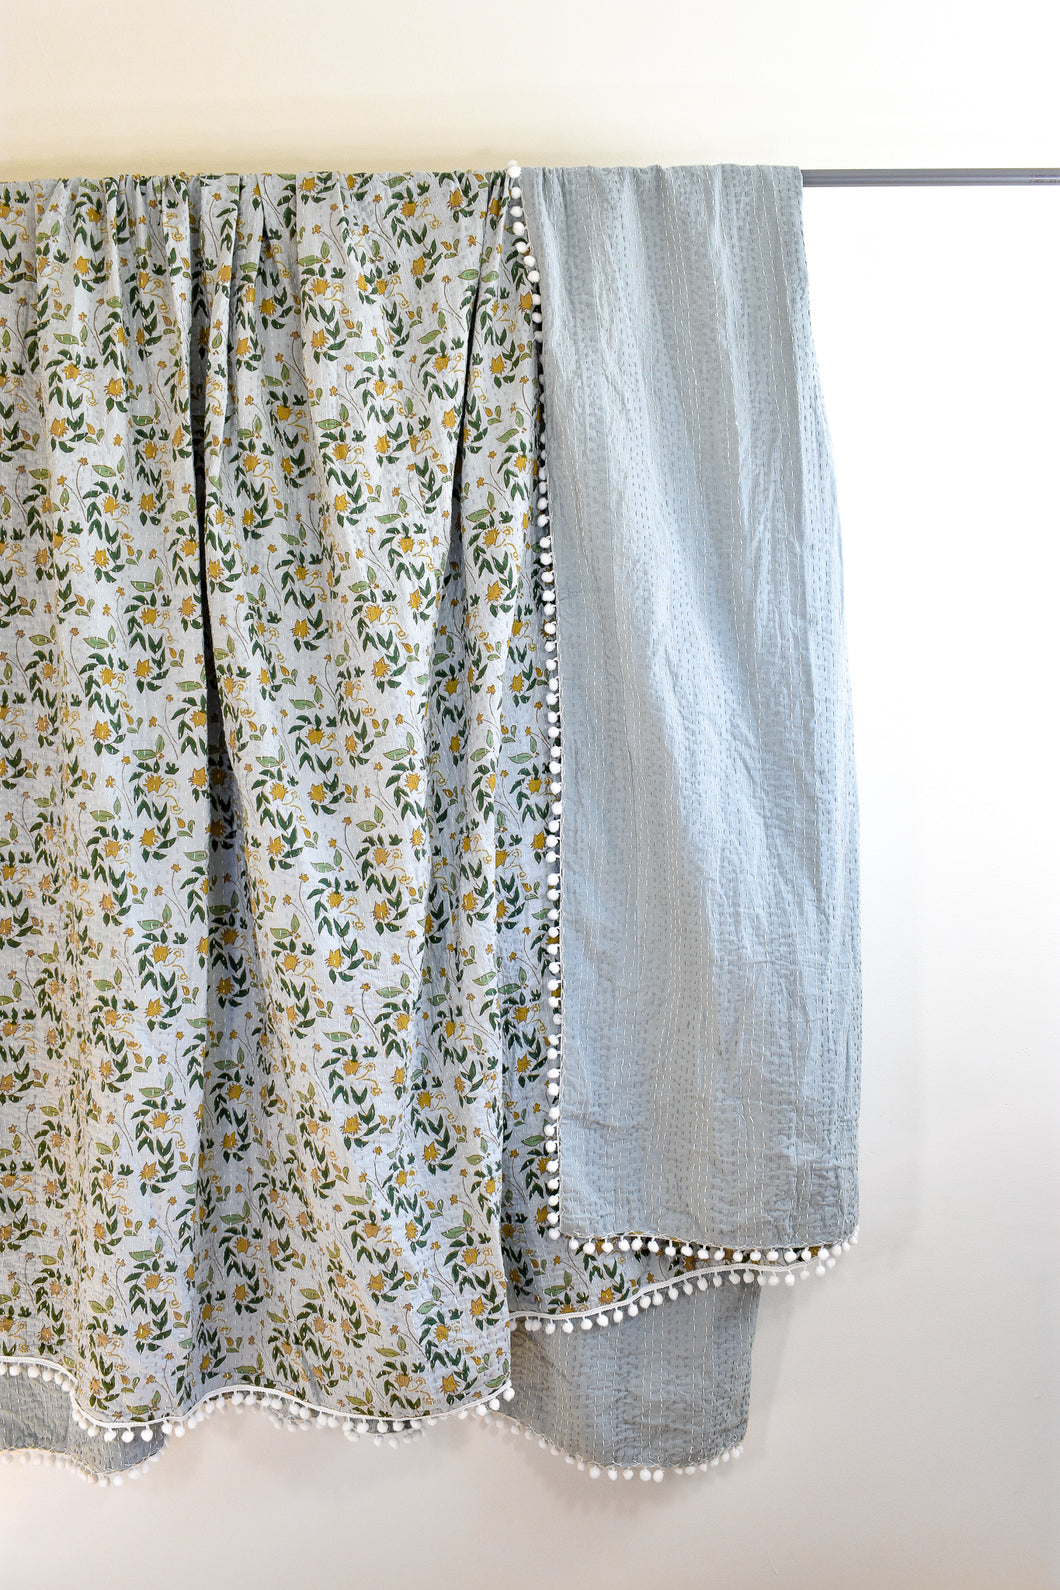 Ally Pom Pom Kantha Quilt in Dusty Blue Gray - King/Queen Sized ...